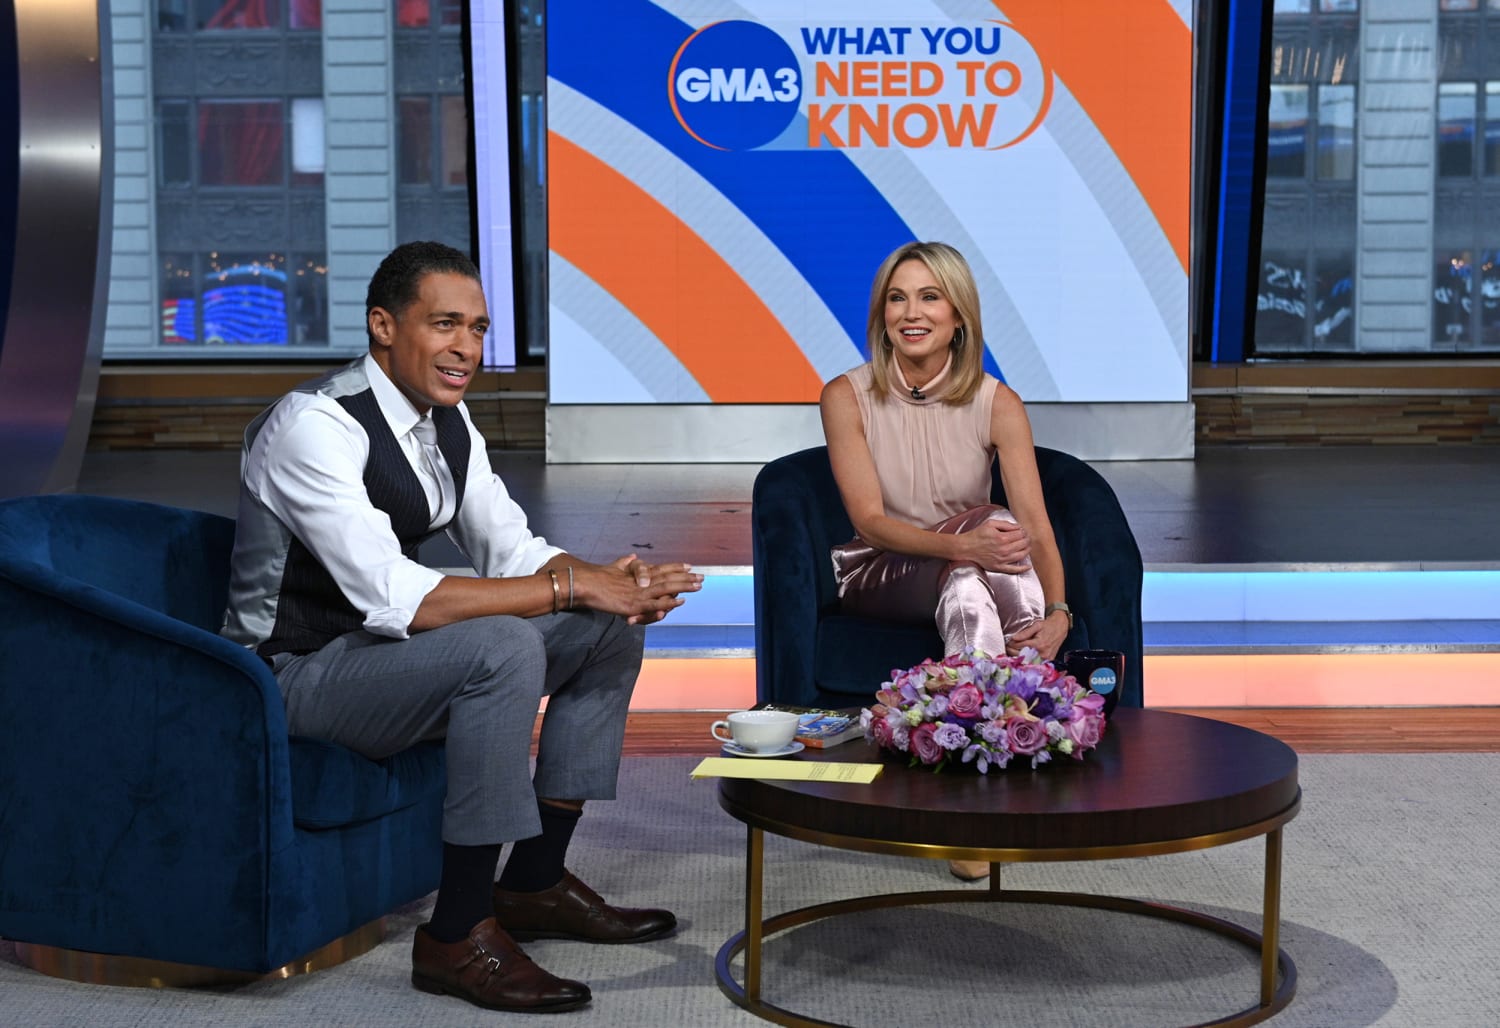 'GMA3's T.J. Holmes and Amy Robach no longer with ABC News following their romance scandal